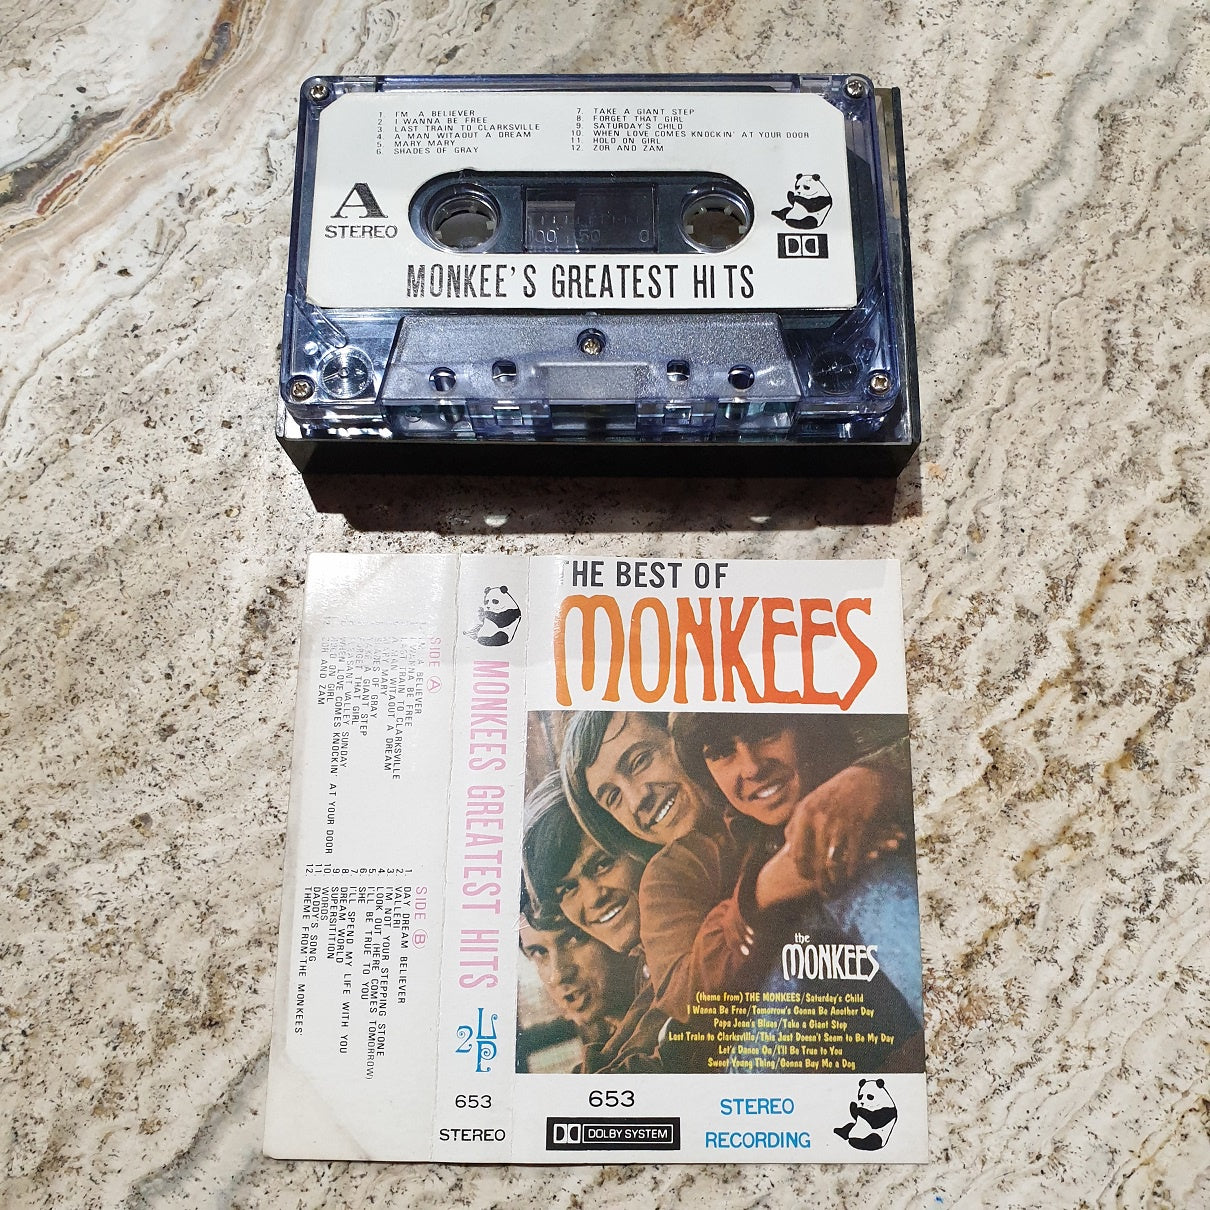 Monkees (The), The Best of Monkees - Cassette